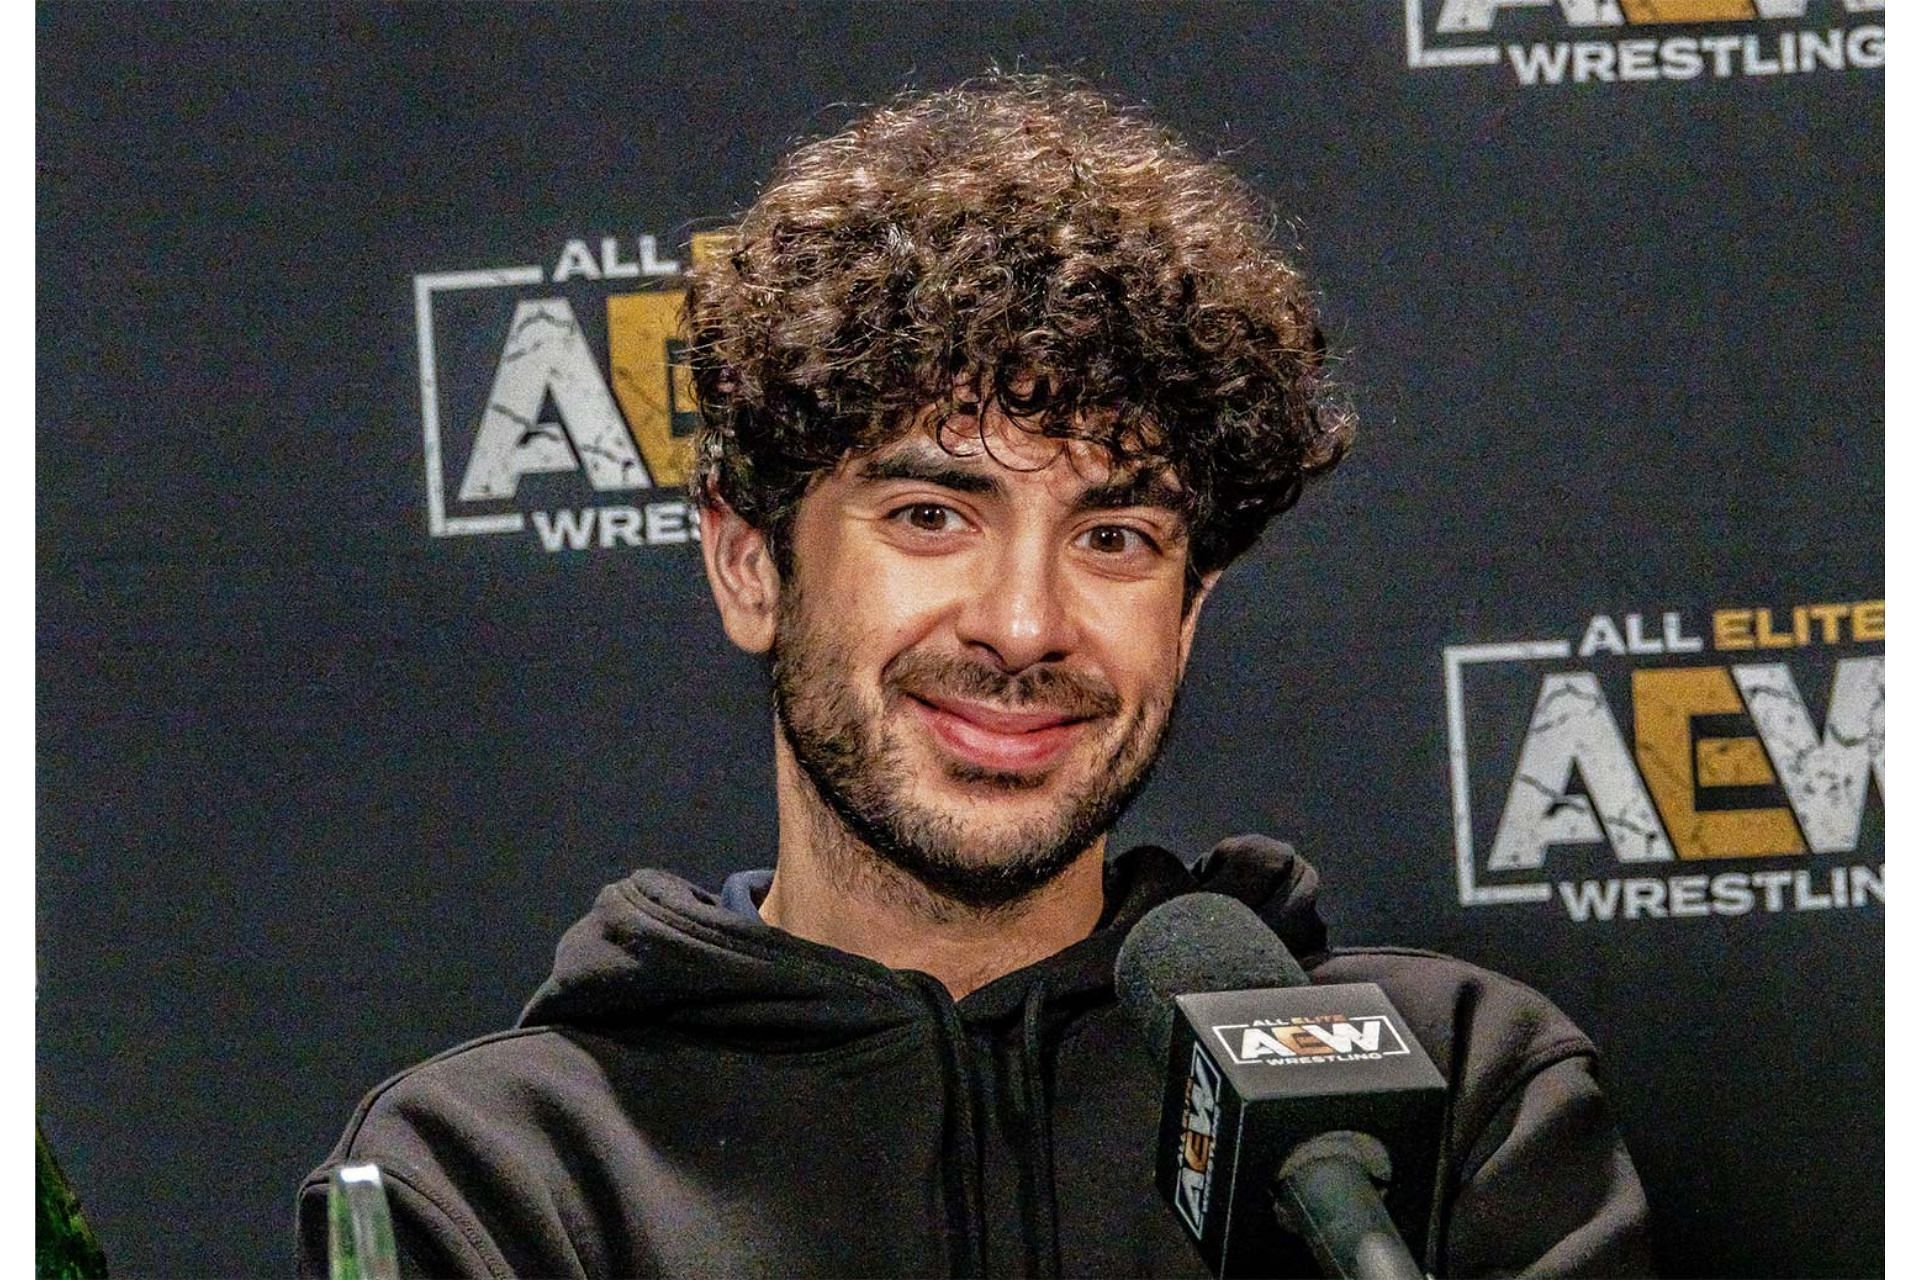 Tony Khan is coming under fire for AEW programming